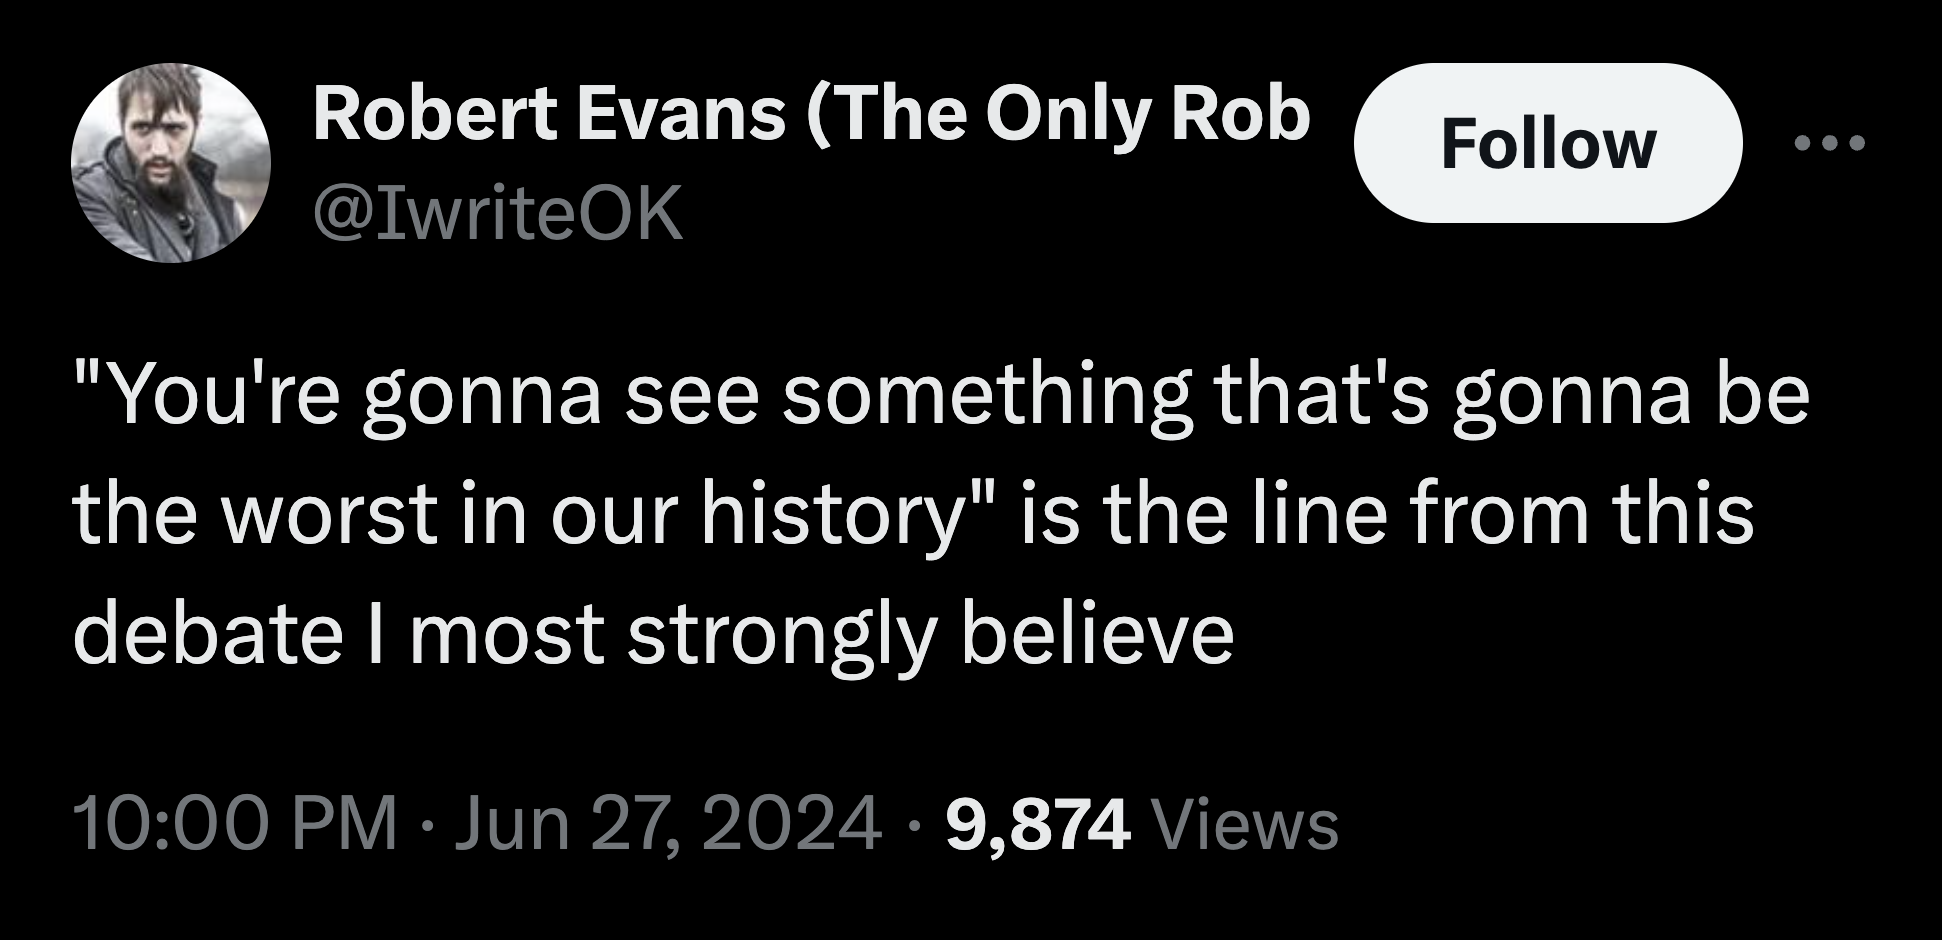 astronomical object - Robert Evans The Only Rob "You're gonna see something that's gonna be the worst in our history" is the line from this debate I most strongly believe 9,874 Views